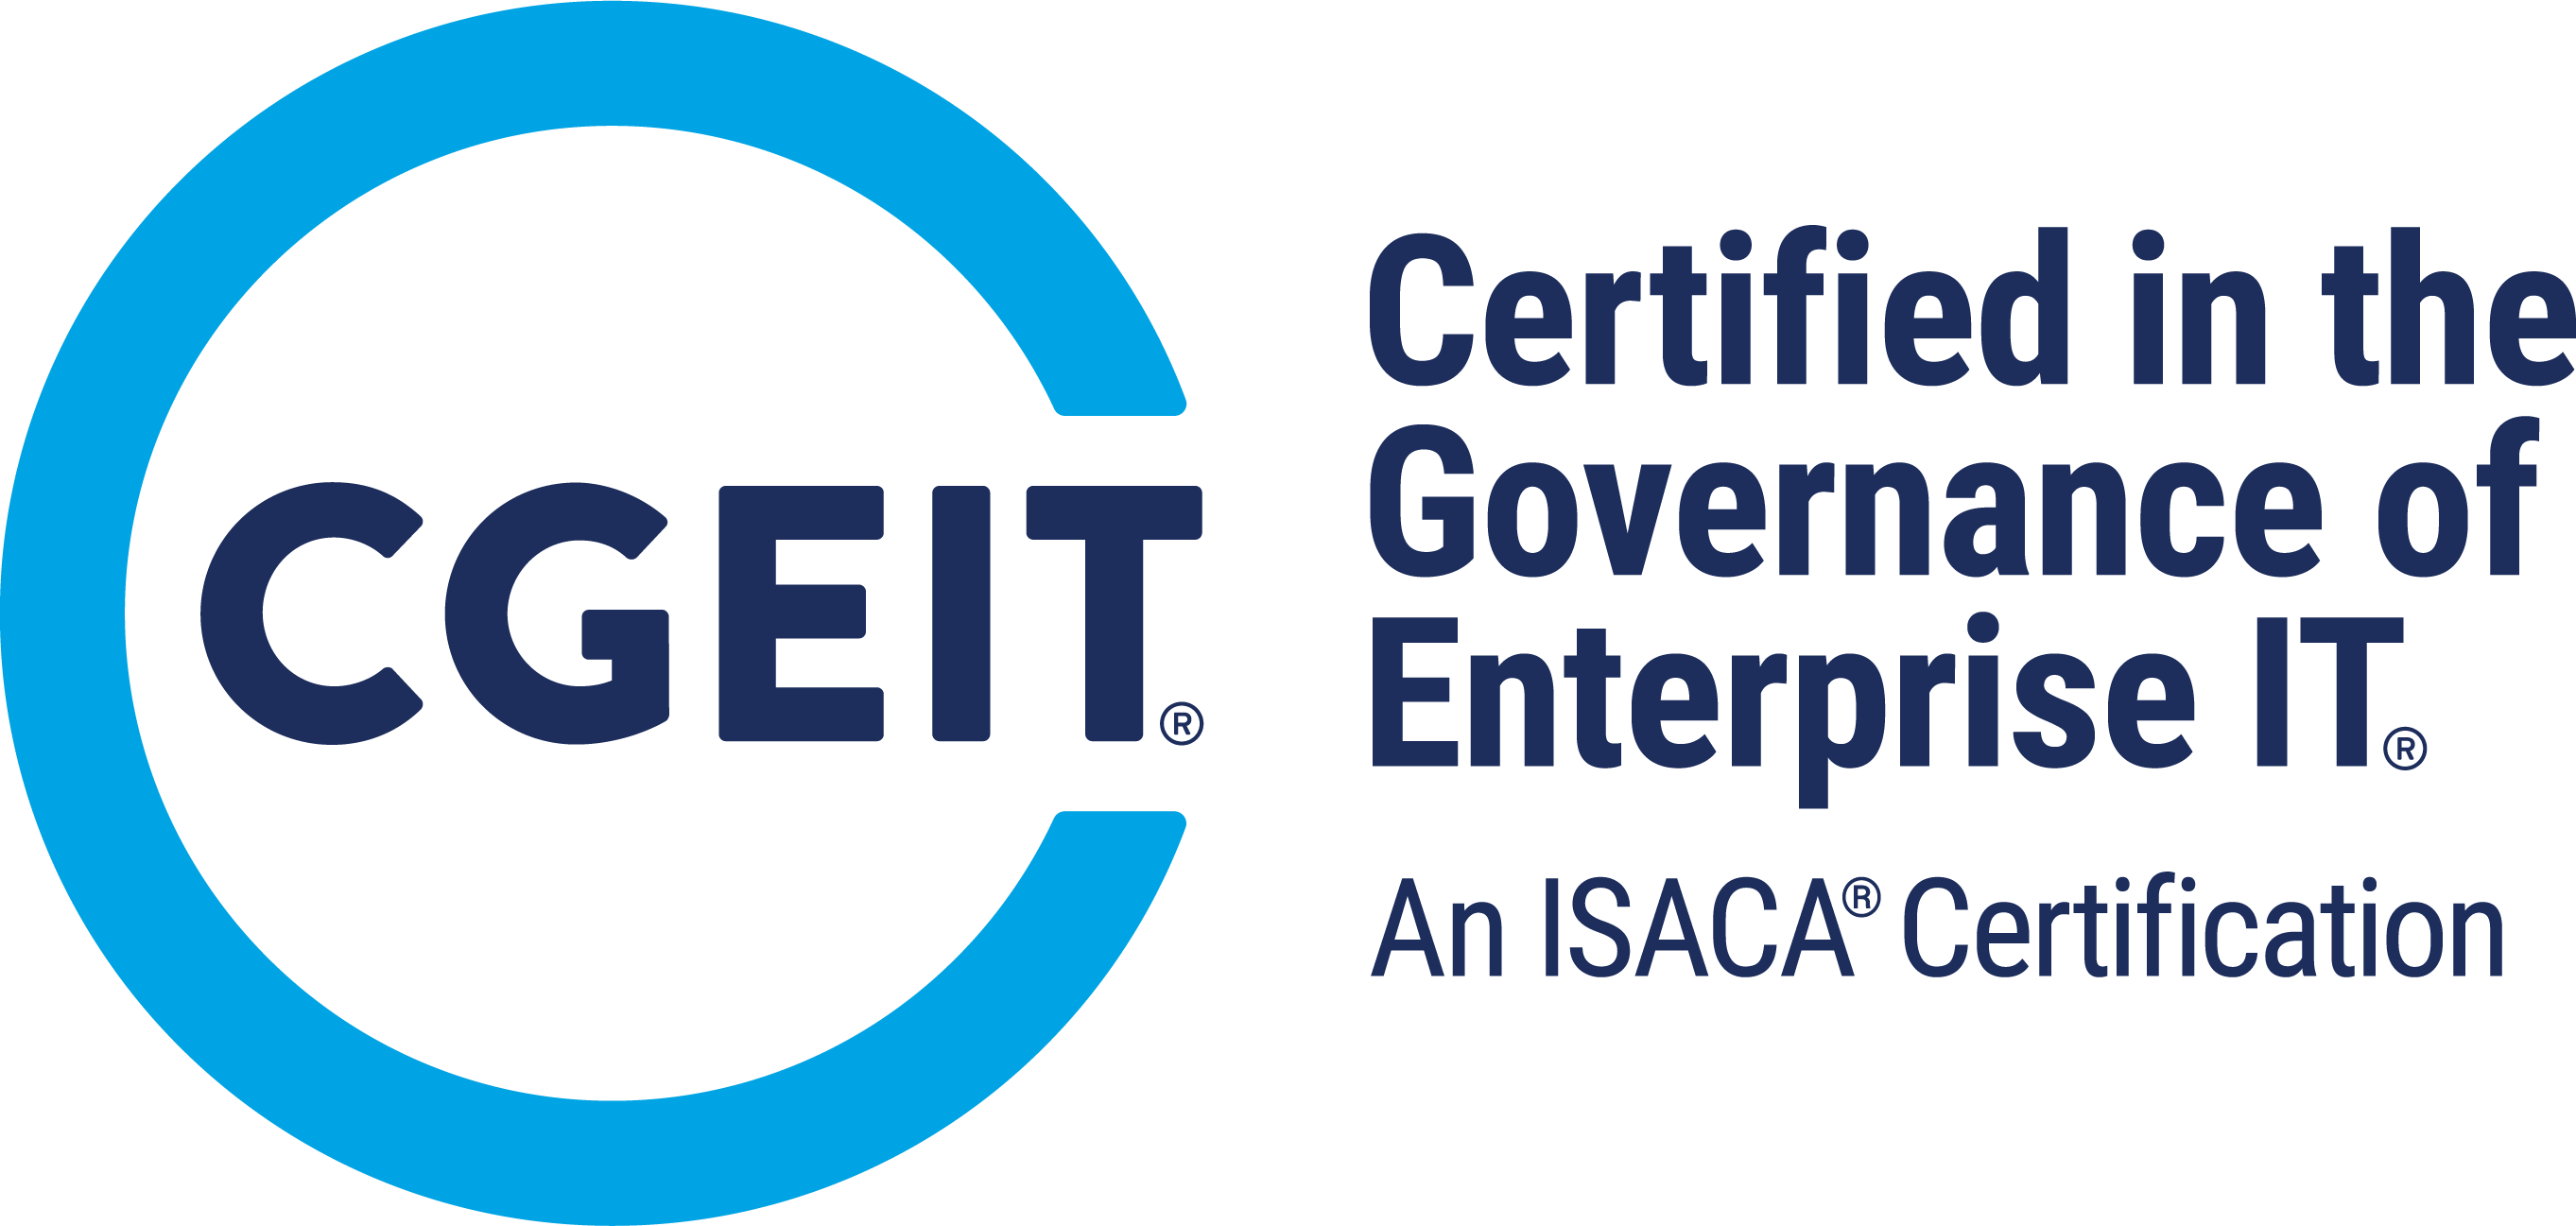 CGEIT Certification: The Path to IT Governance Excellence